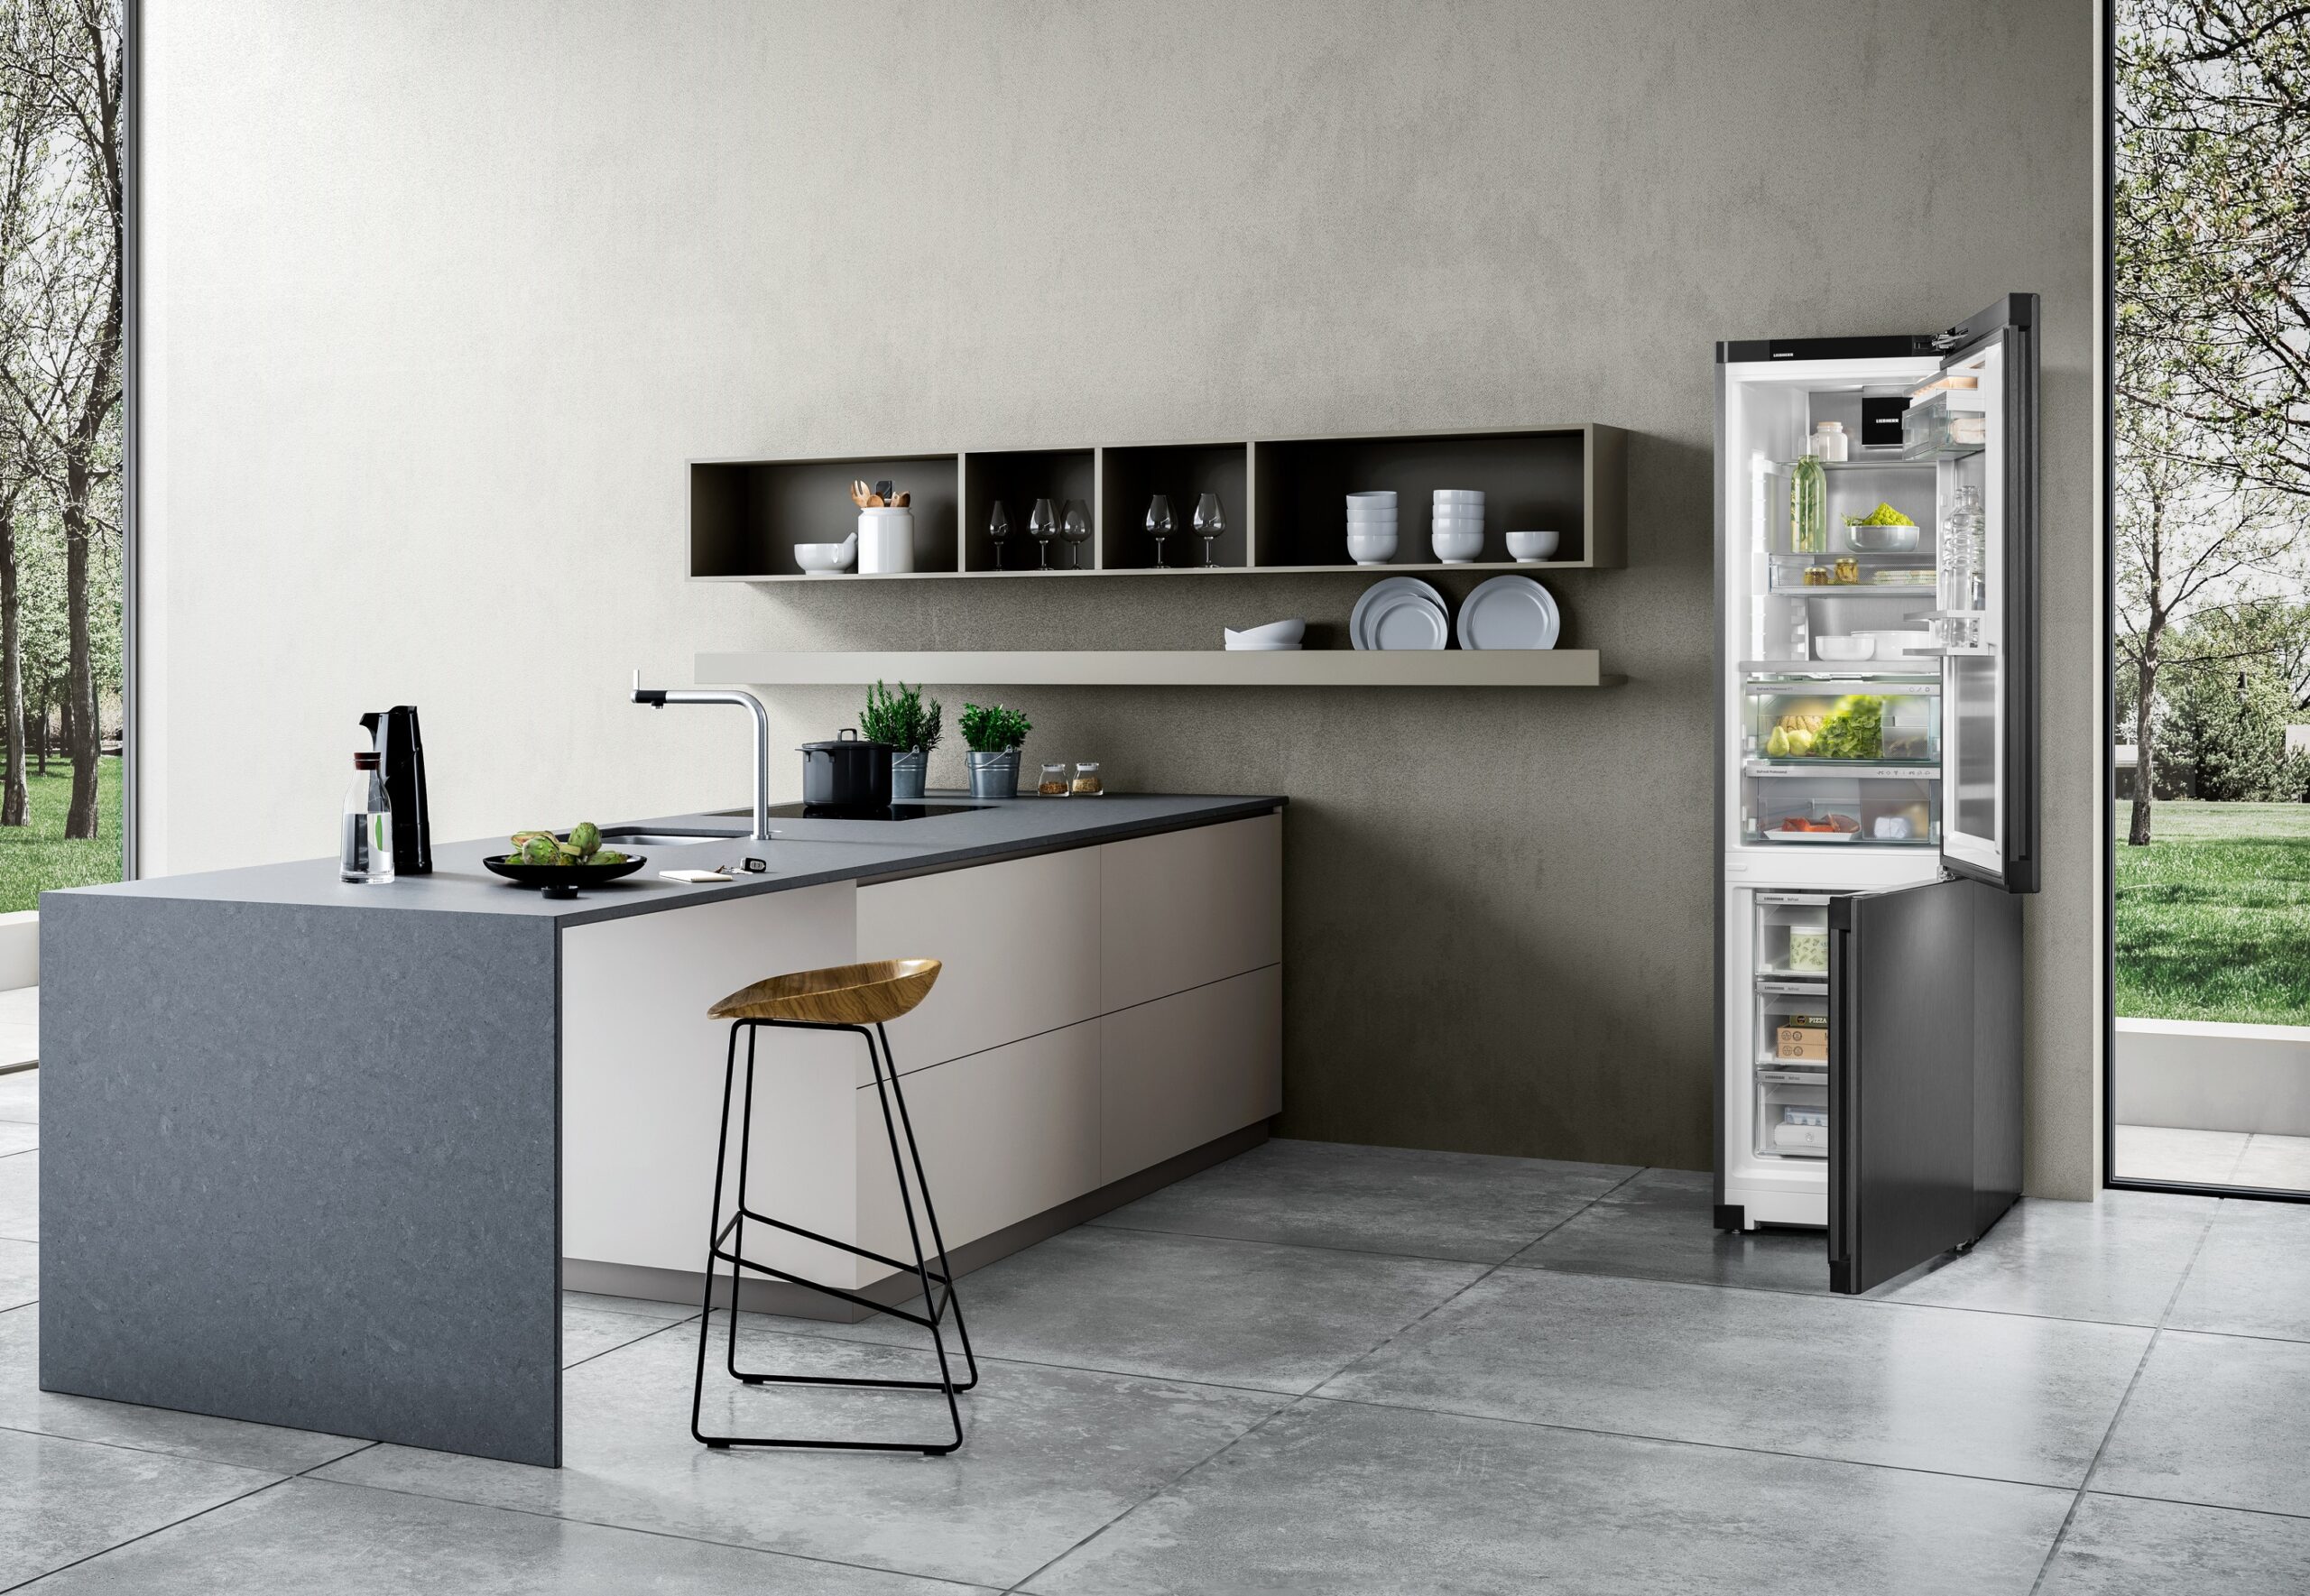 Liebherr to showcase the future of sustainable refrigeration and freezing at IFA 2022